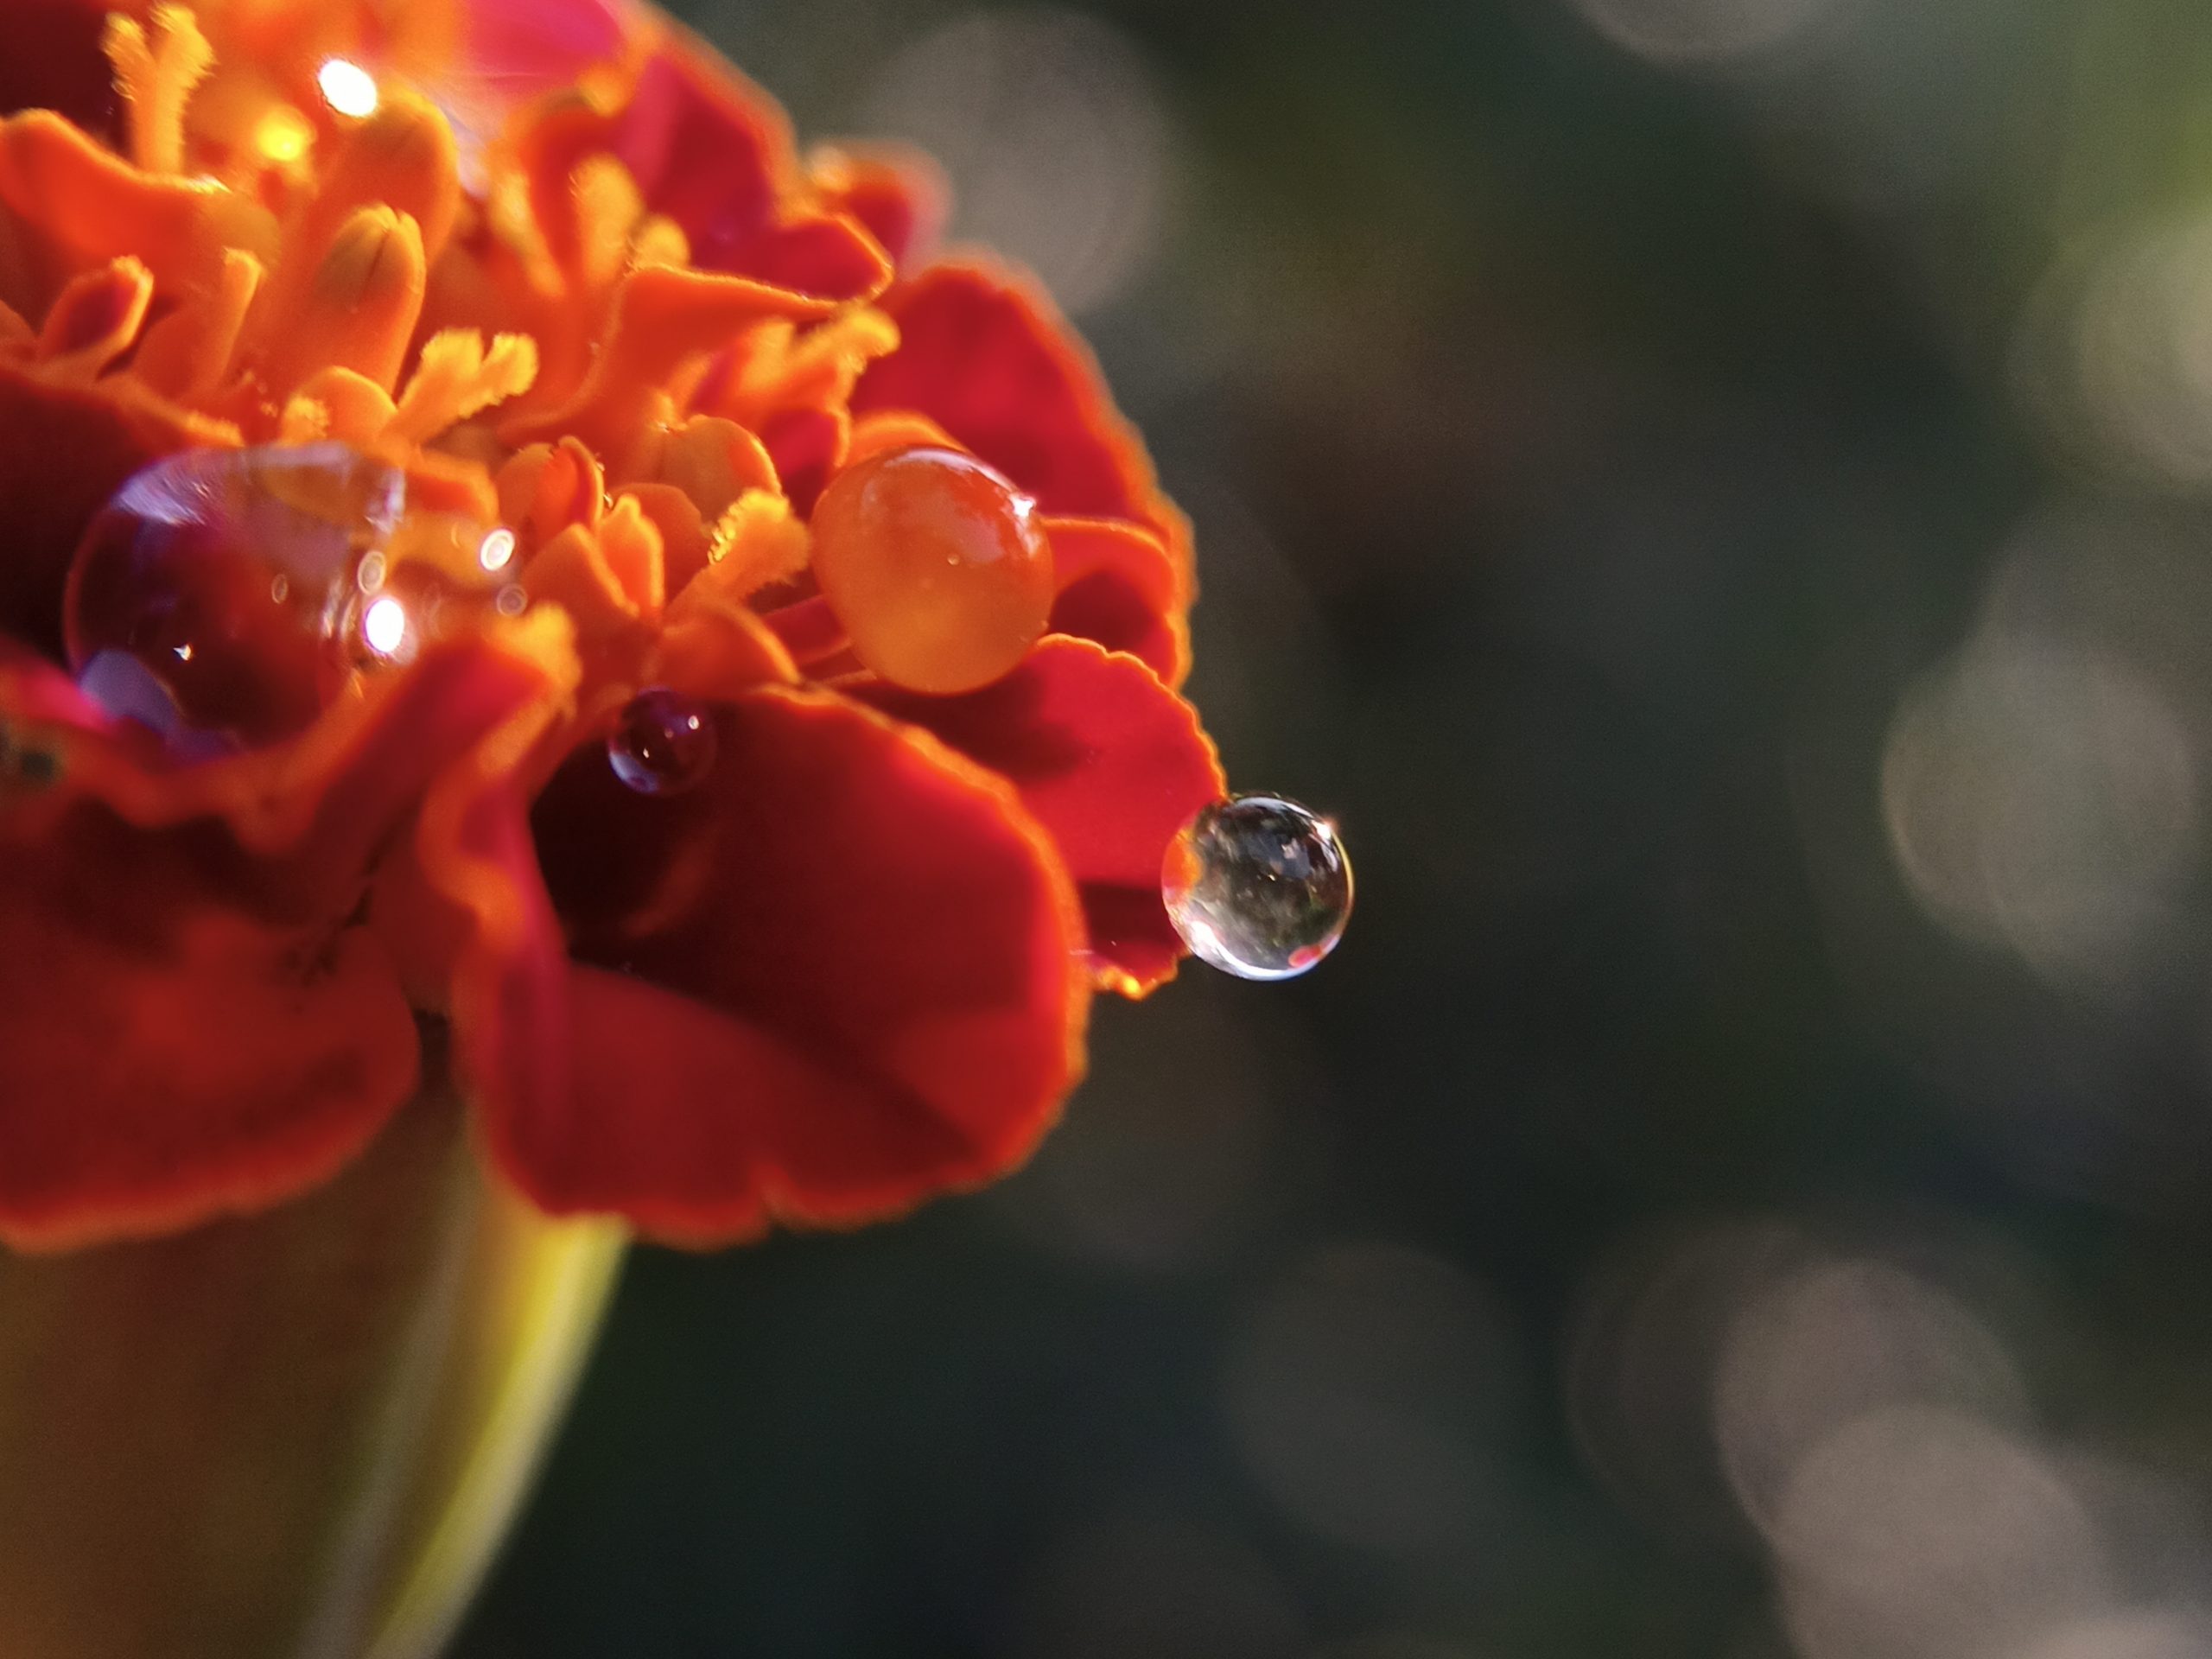 Water drops on a flower